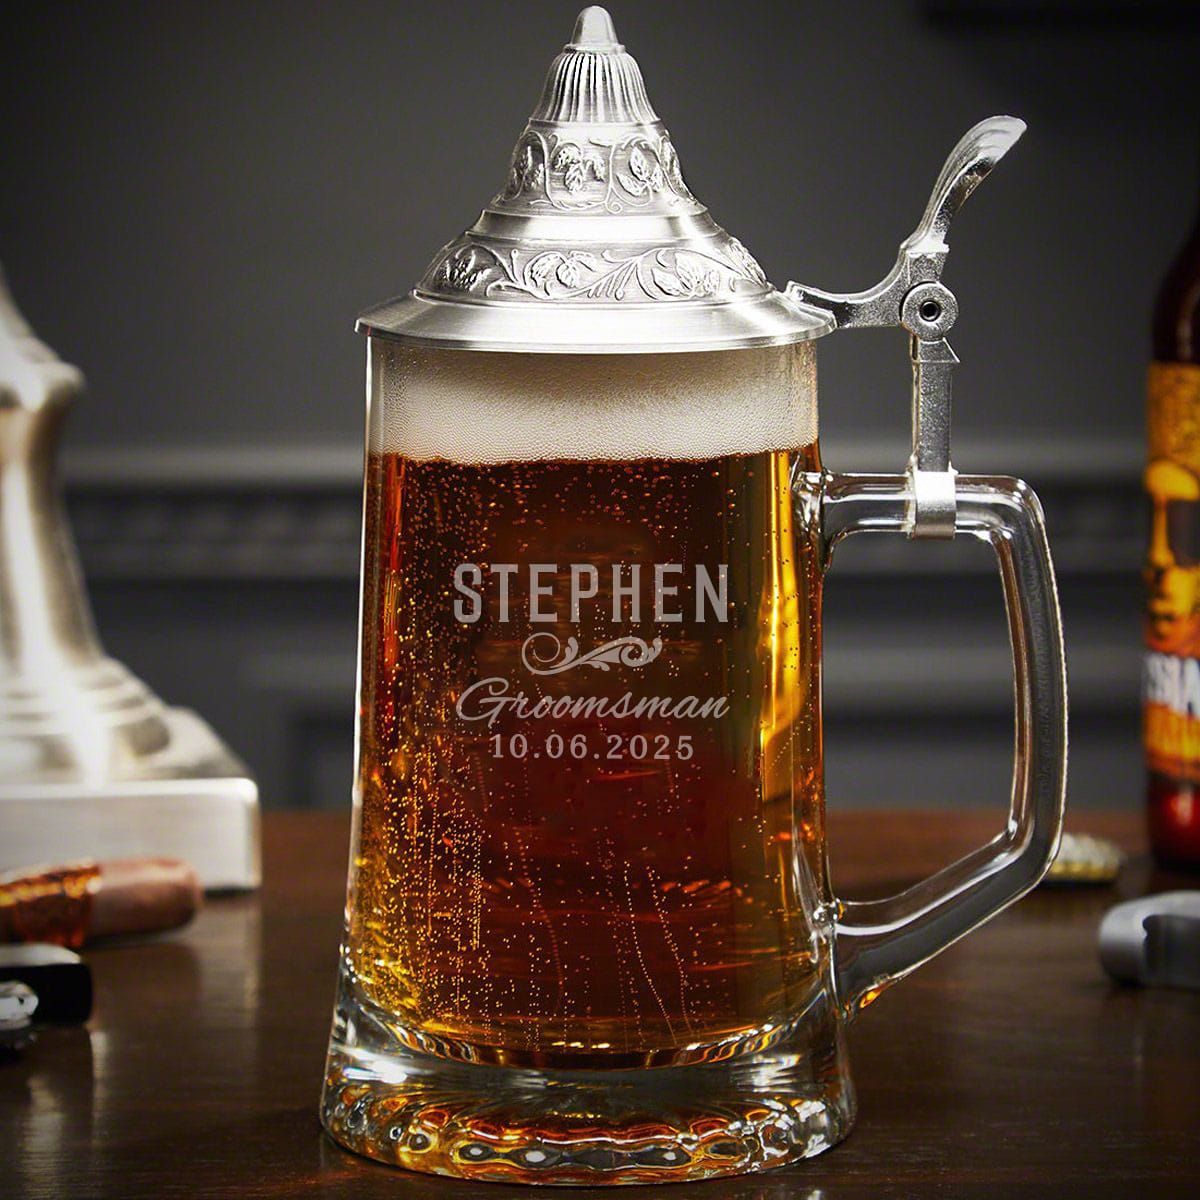 https://images.homewetbar.com/media/catalog/product/g/e/german-beer-stein-with-conical-lid-classic-groomsmen_1.jpg?store=default&image-type=image